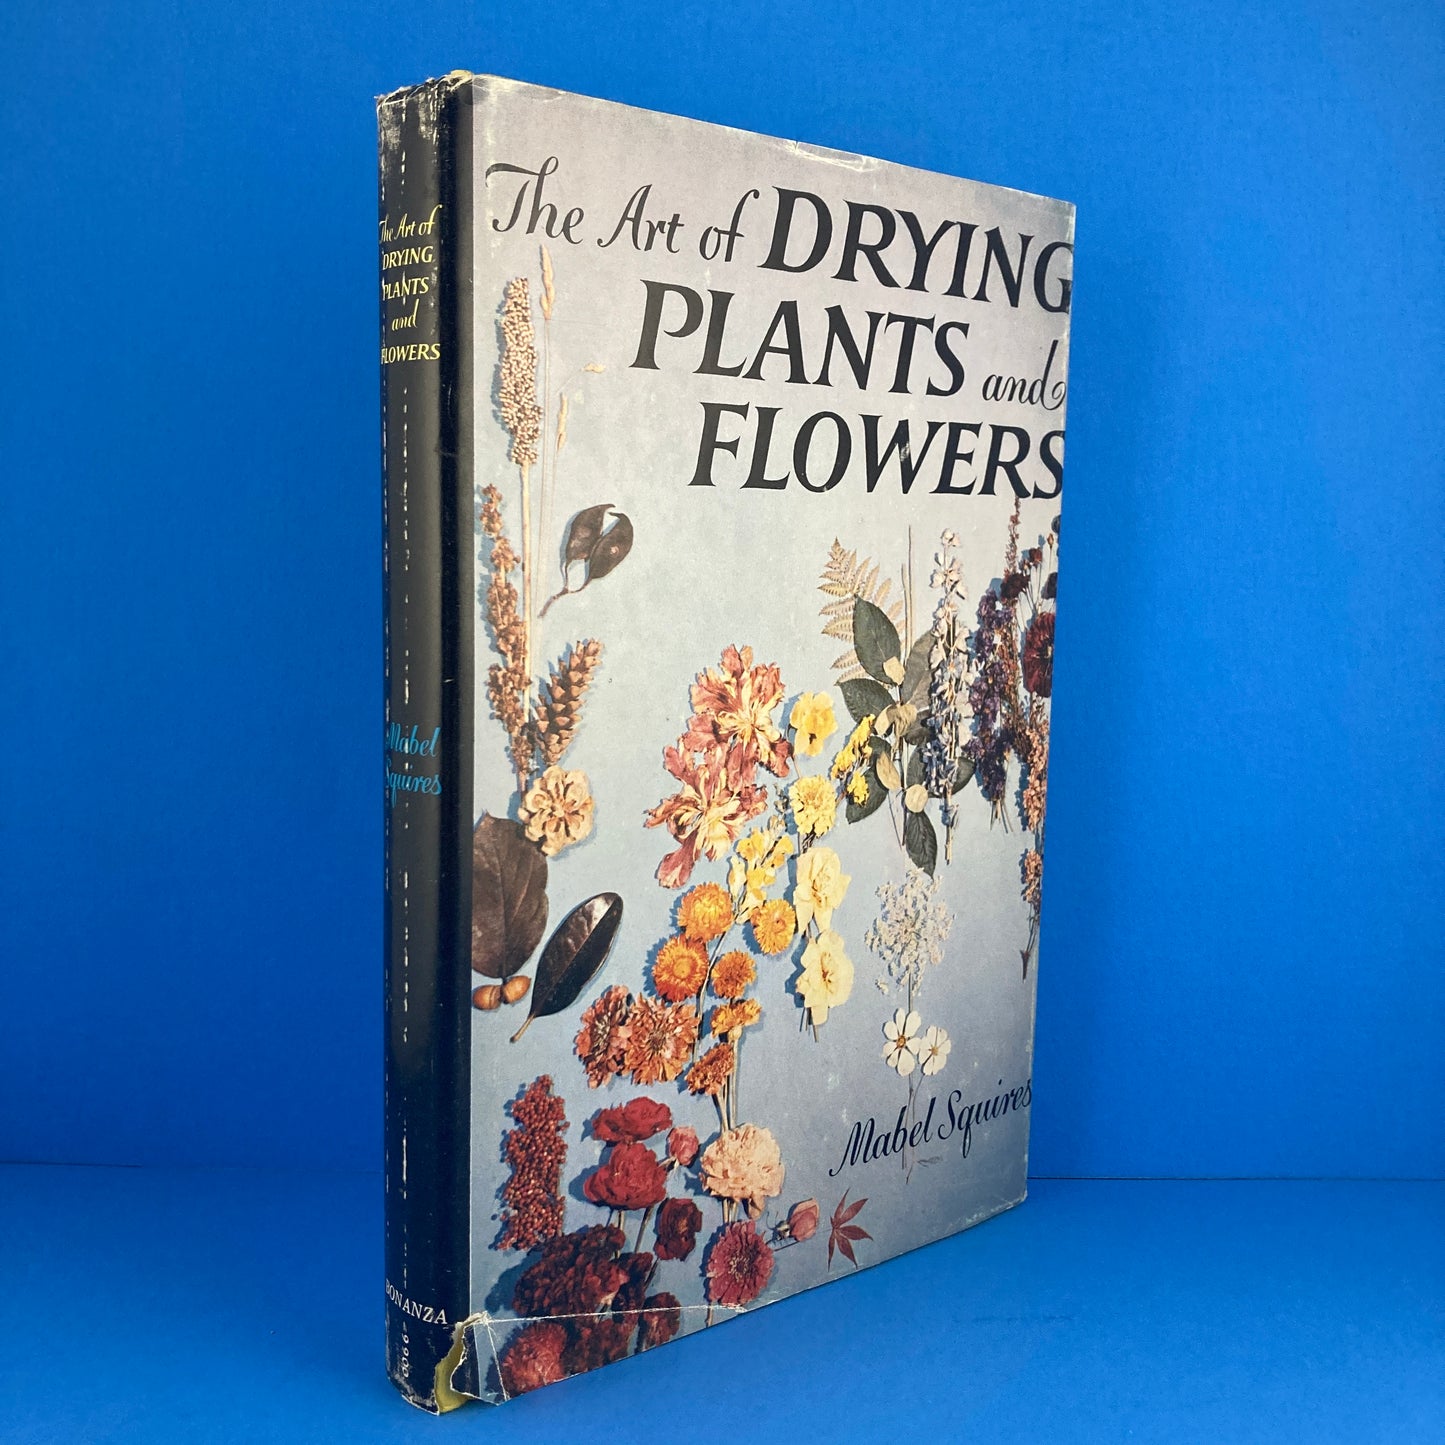 The Art of Drying Plants and Flowers